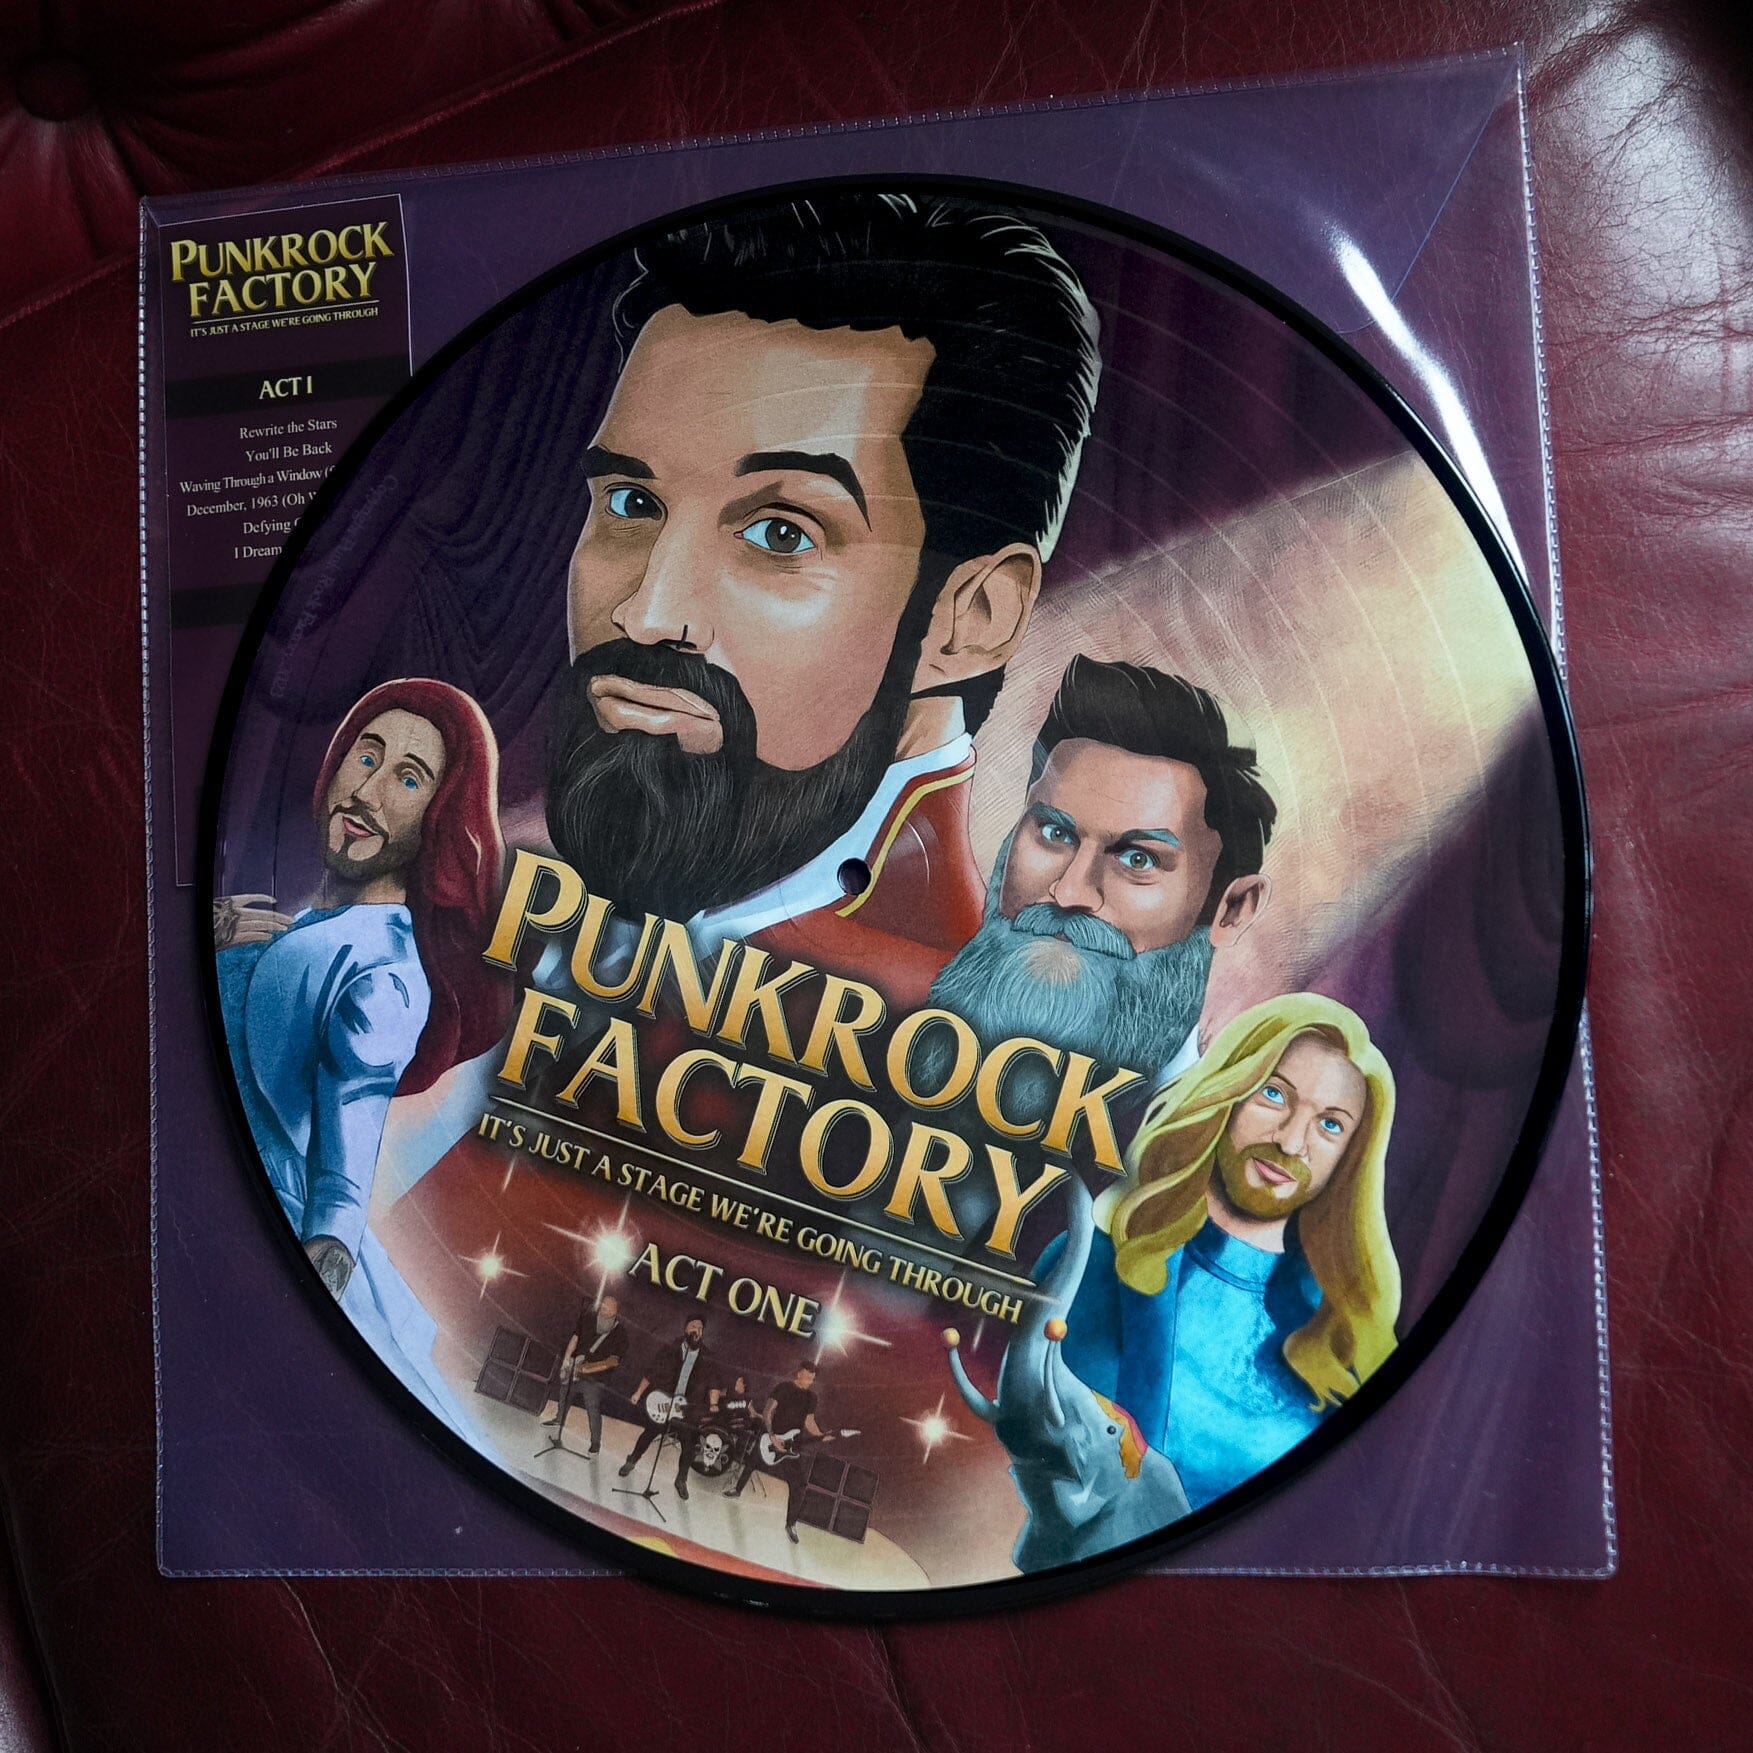 It's Just a Stage We're Going Picture Disc Vinyl Punk Rock Factory 